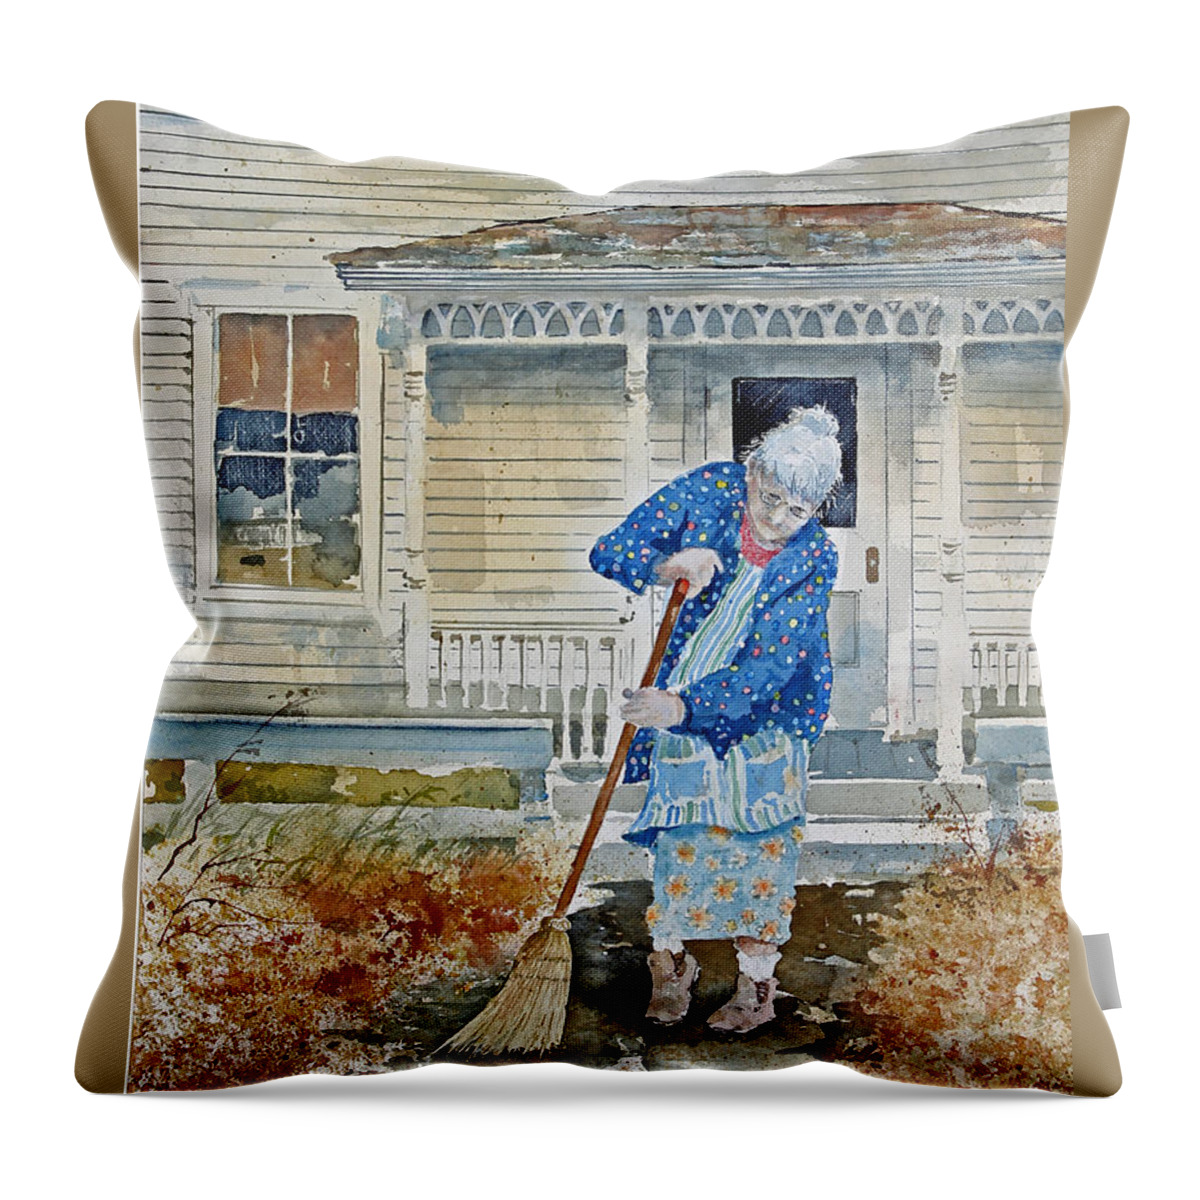 A Grandmother Sweeps The Autumn Leaves Off Her Walk In Front Of Her Home. Throw Pillow featuring the painting Grandma by Monte Toon